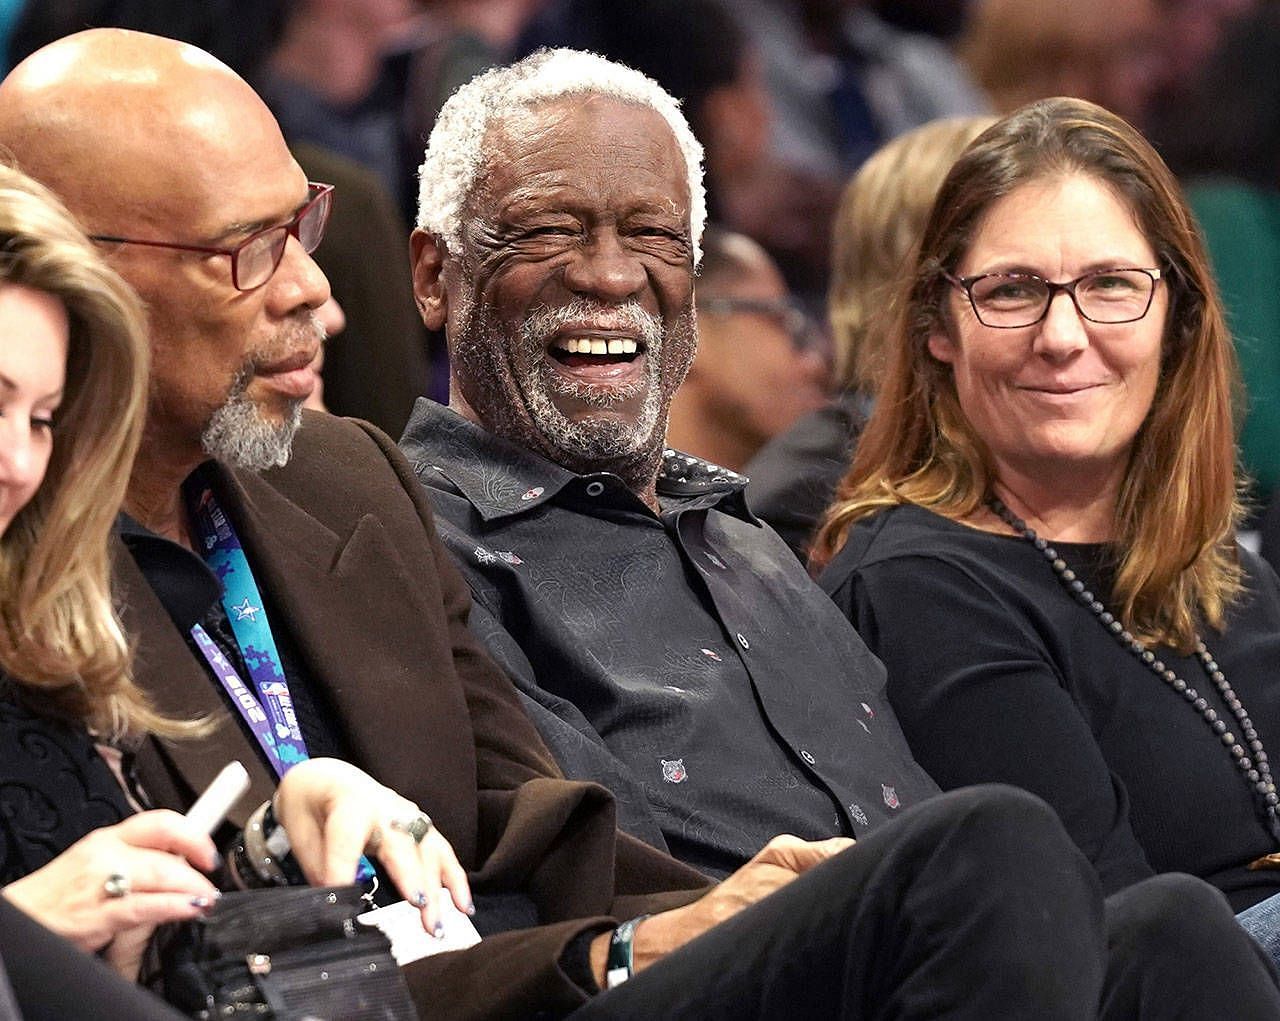 Bill Russell with his wife Jeannine Russell (right) at an NBA game with Kareem Abdul-Jabbar (left)